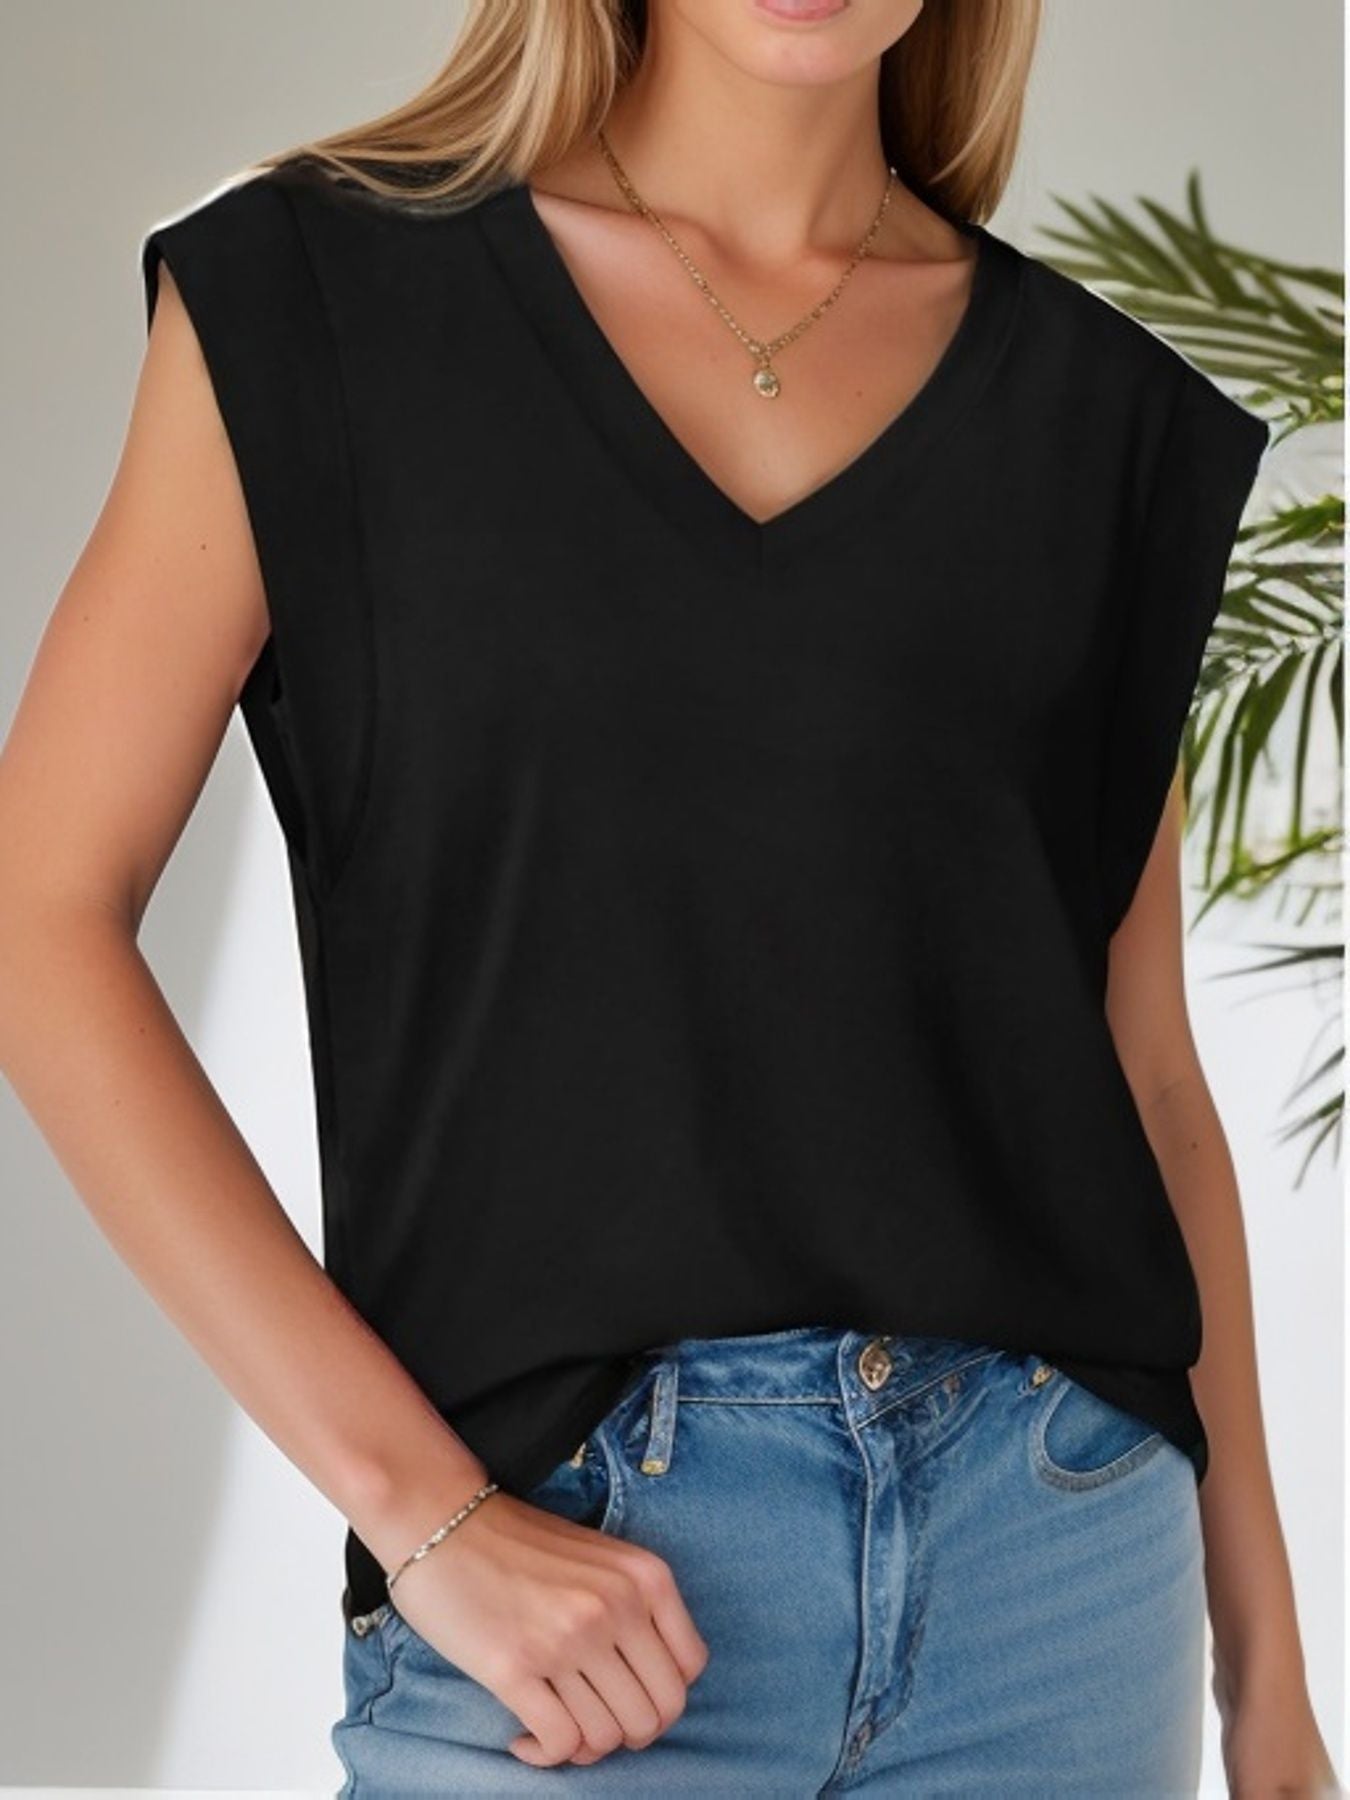 Women's Spring Loose Solid Color Bottoming Shirt Tops